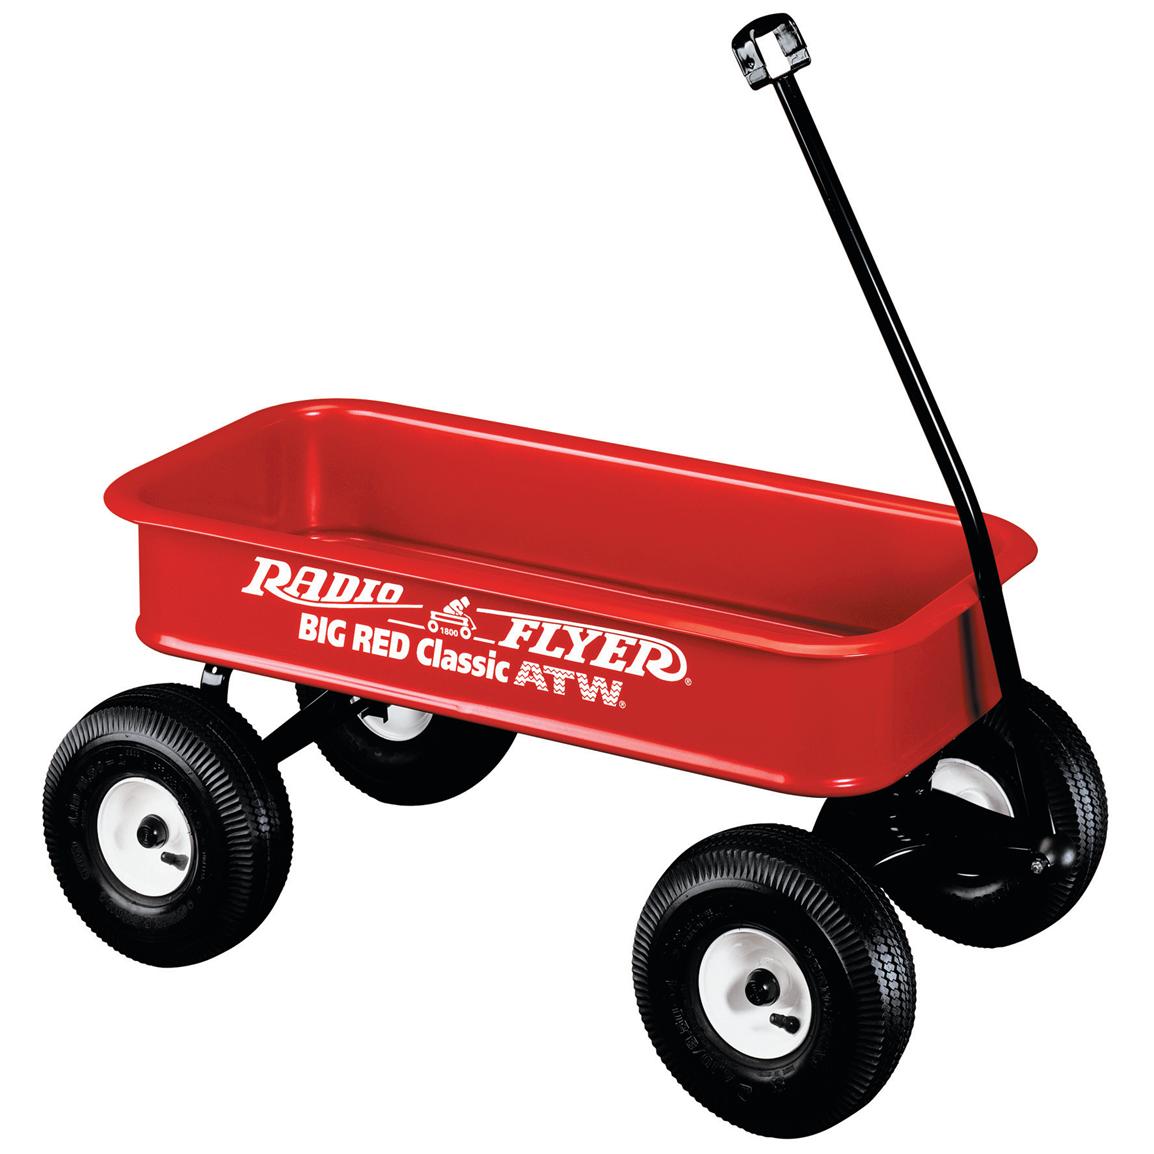 Radio Flyer Big Red Classic Atw Wagon - 375848, Riding Toys at ...